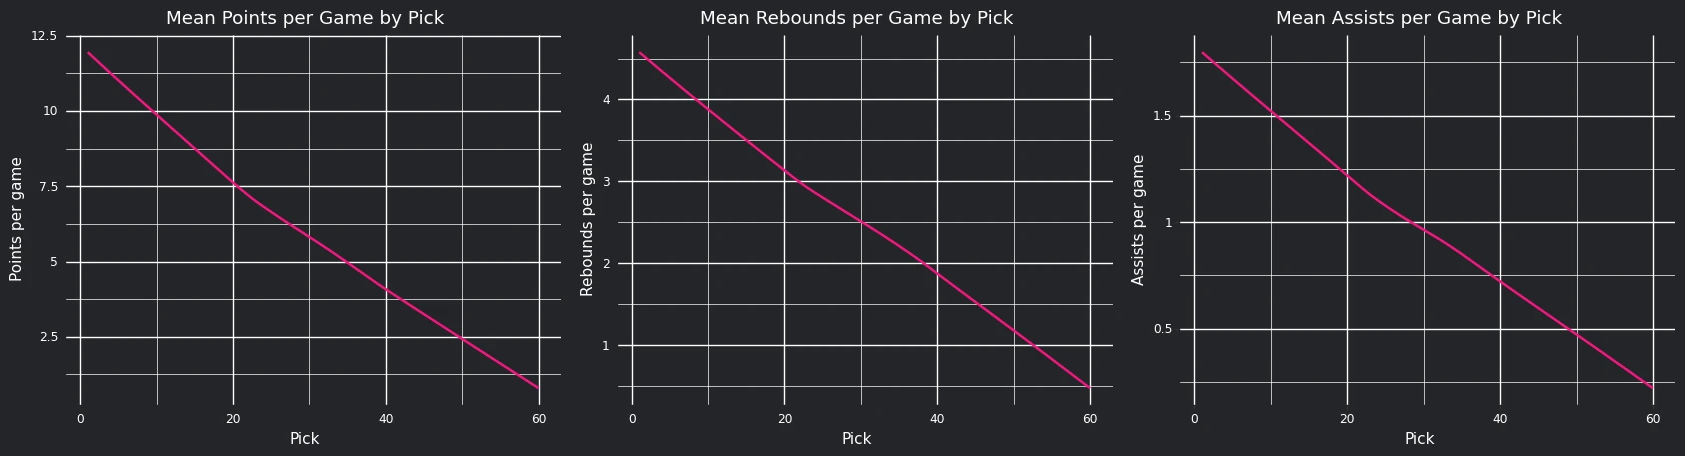 Graphs showing the mean points per game, assists per game, and rebounds per game, all of which are measured based on their draft pick.